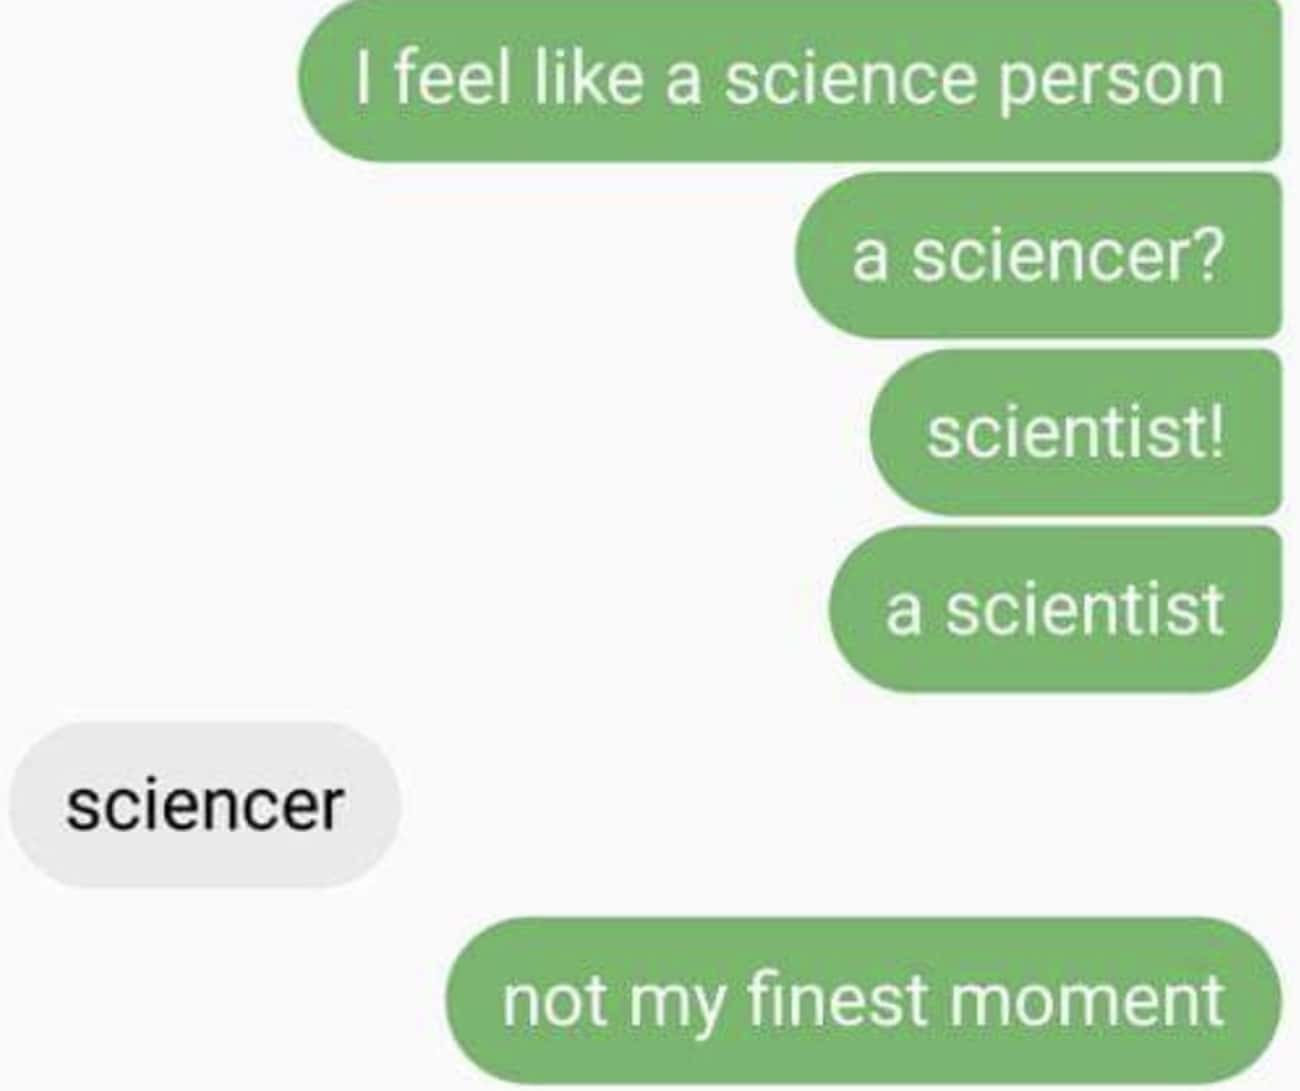 Feel like перевод на русский. Green Science aesthetic. Scientist aesthetic. Cause i feel like. Funny text personality.